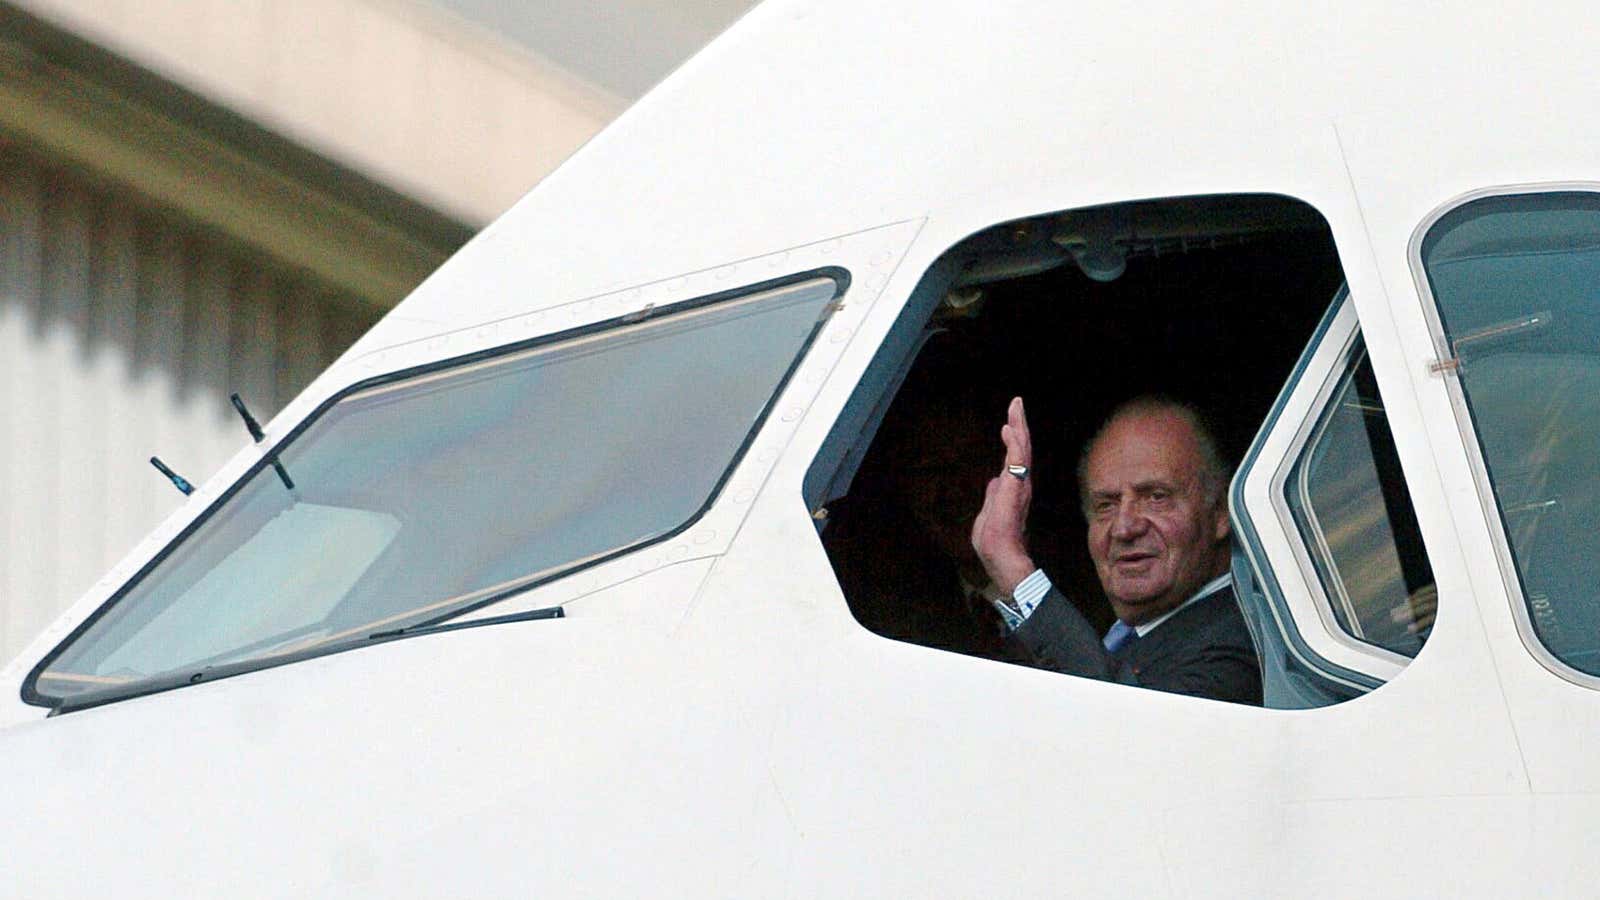 King Juan Carlos takes matters into his own hands.